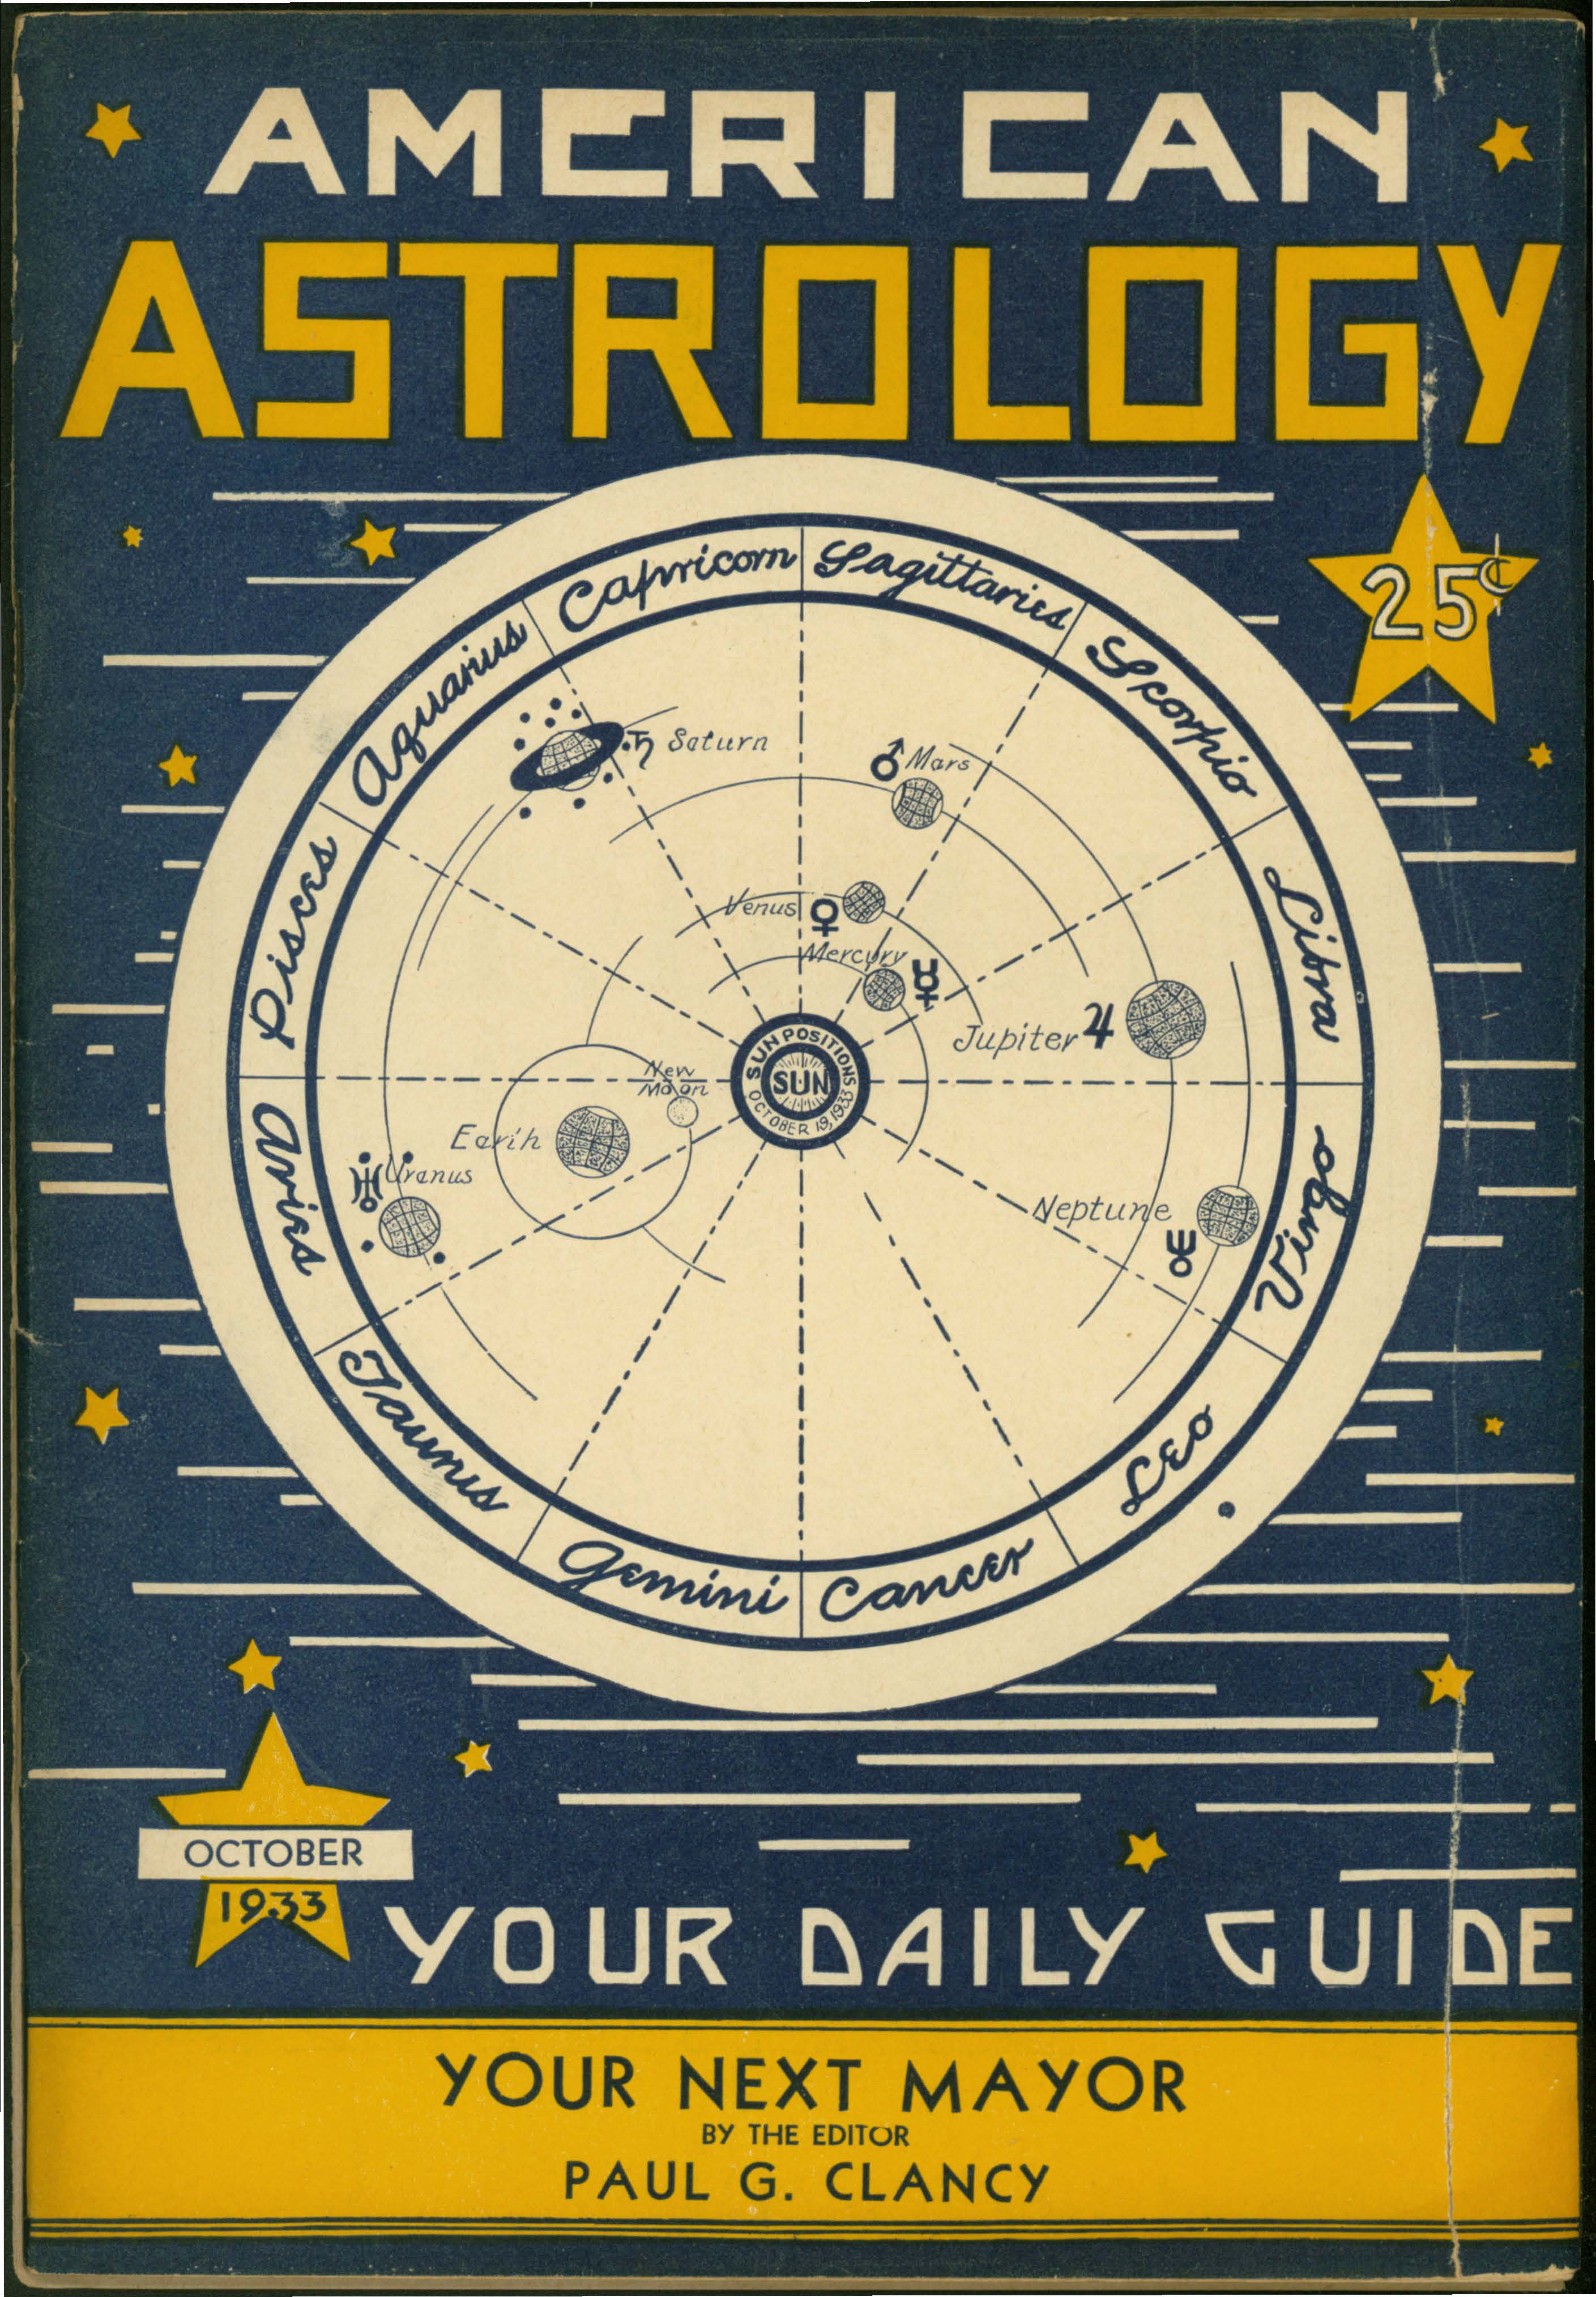 American Astrology 1933 covers_Page_6